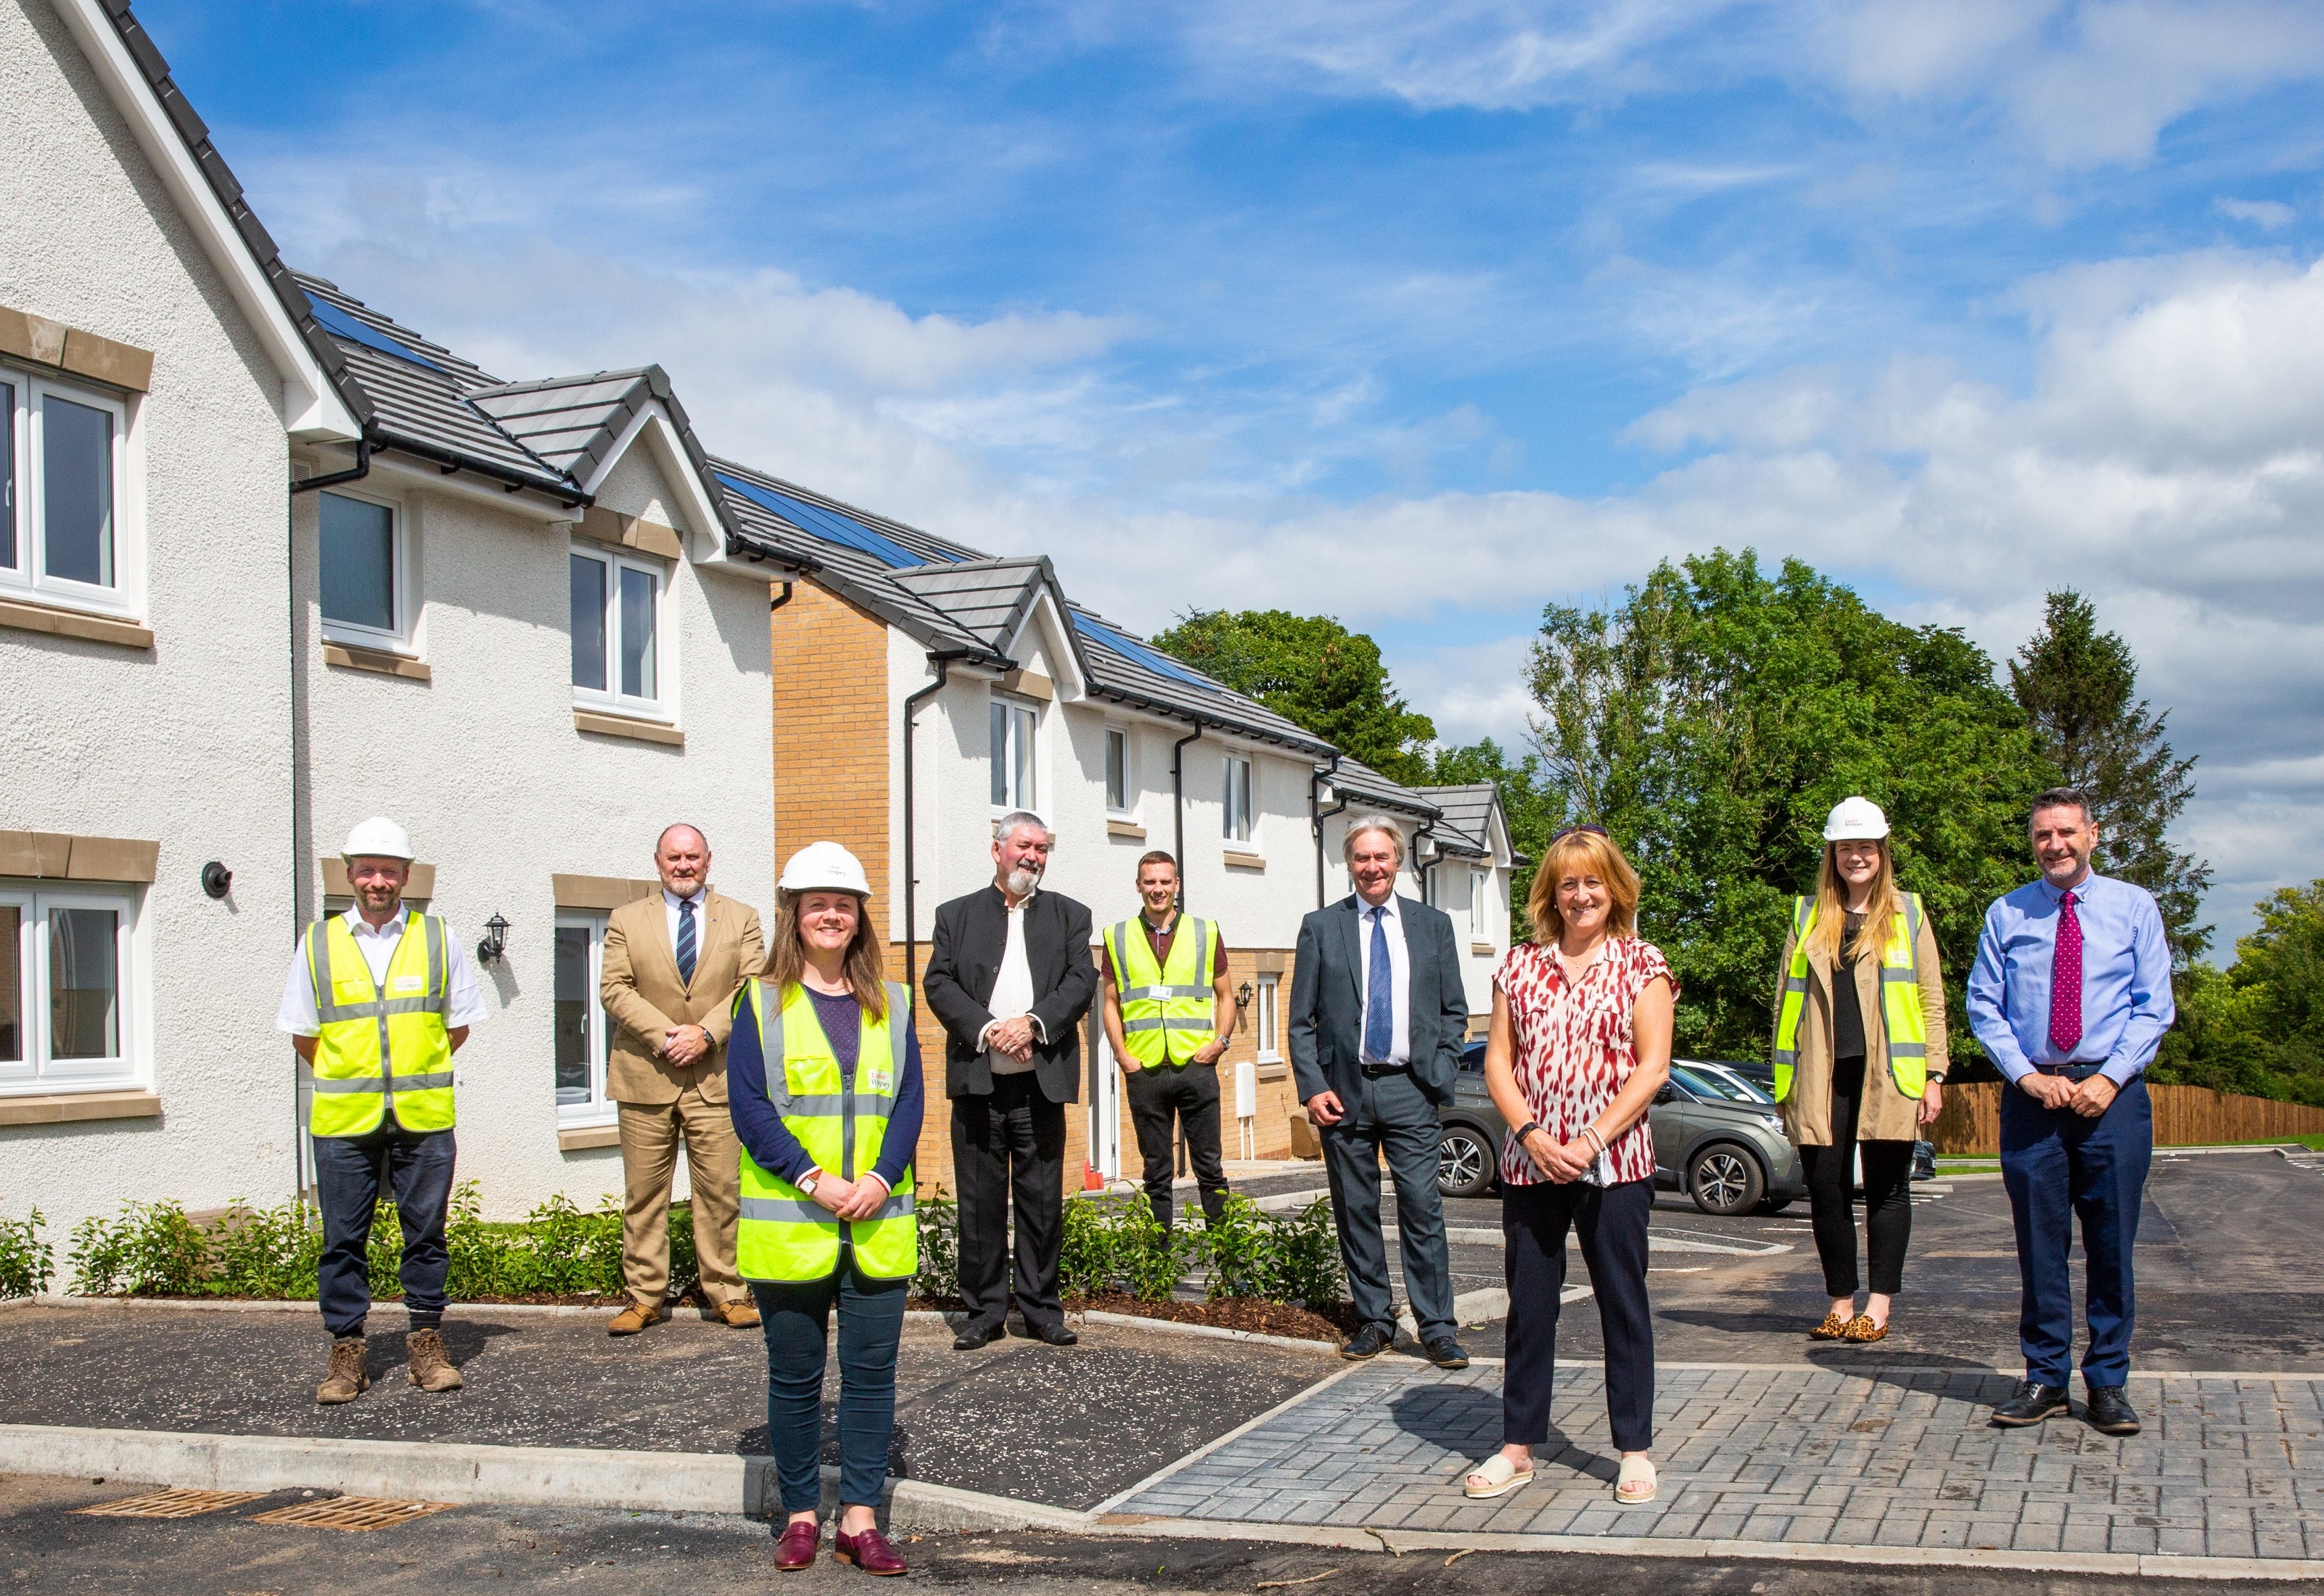 12 new affordable homes handed over to Barrhead Housing Association